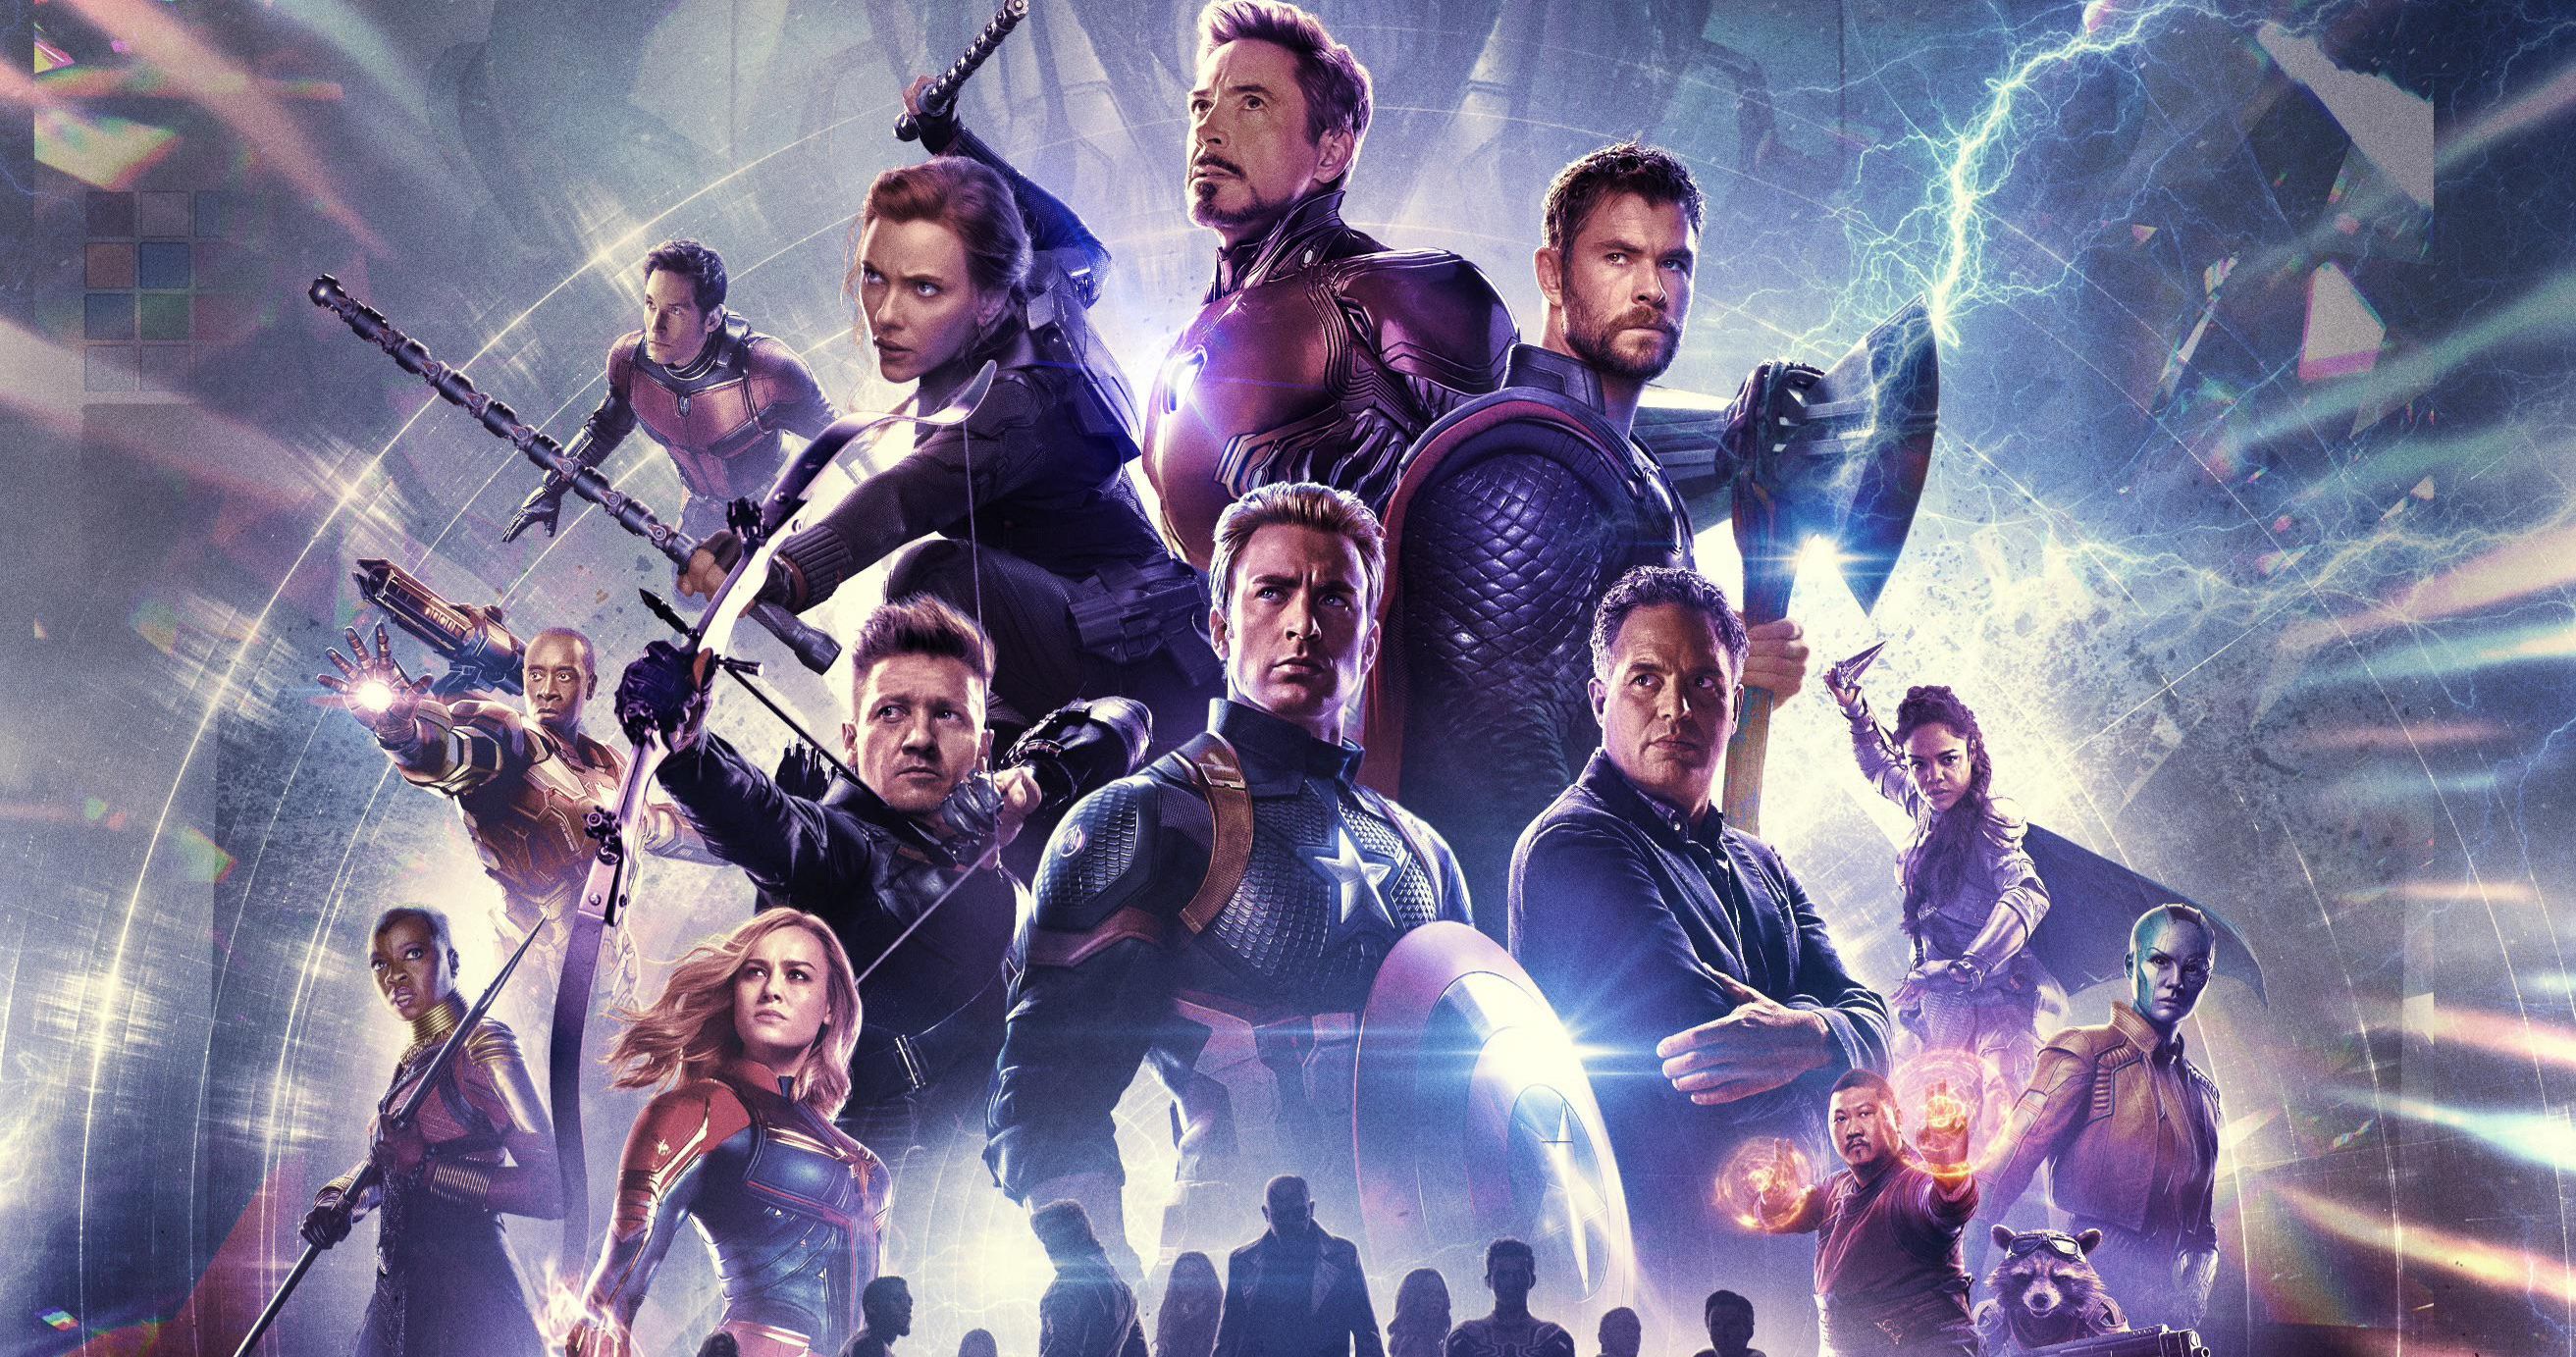 Avengers: Endgame Celebrated by Marvel Fans Two Years After Its Release